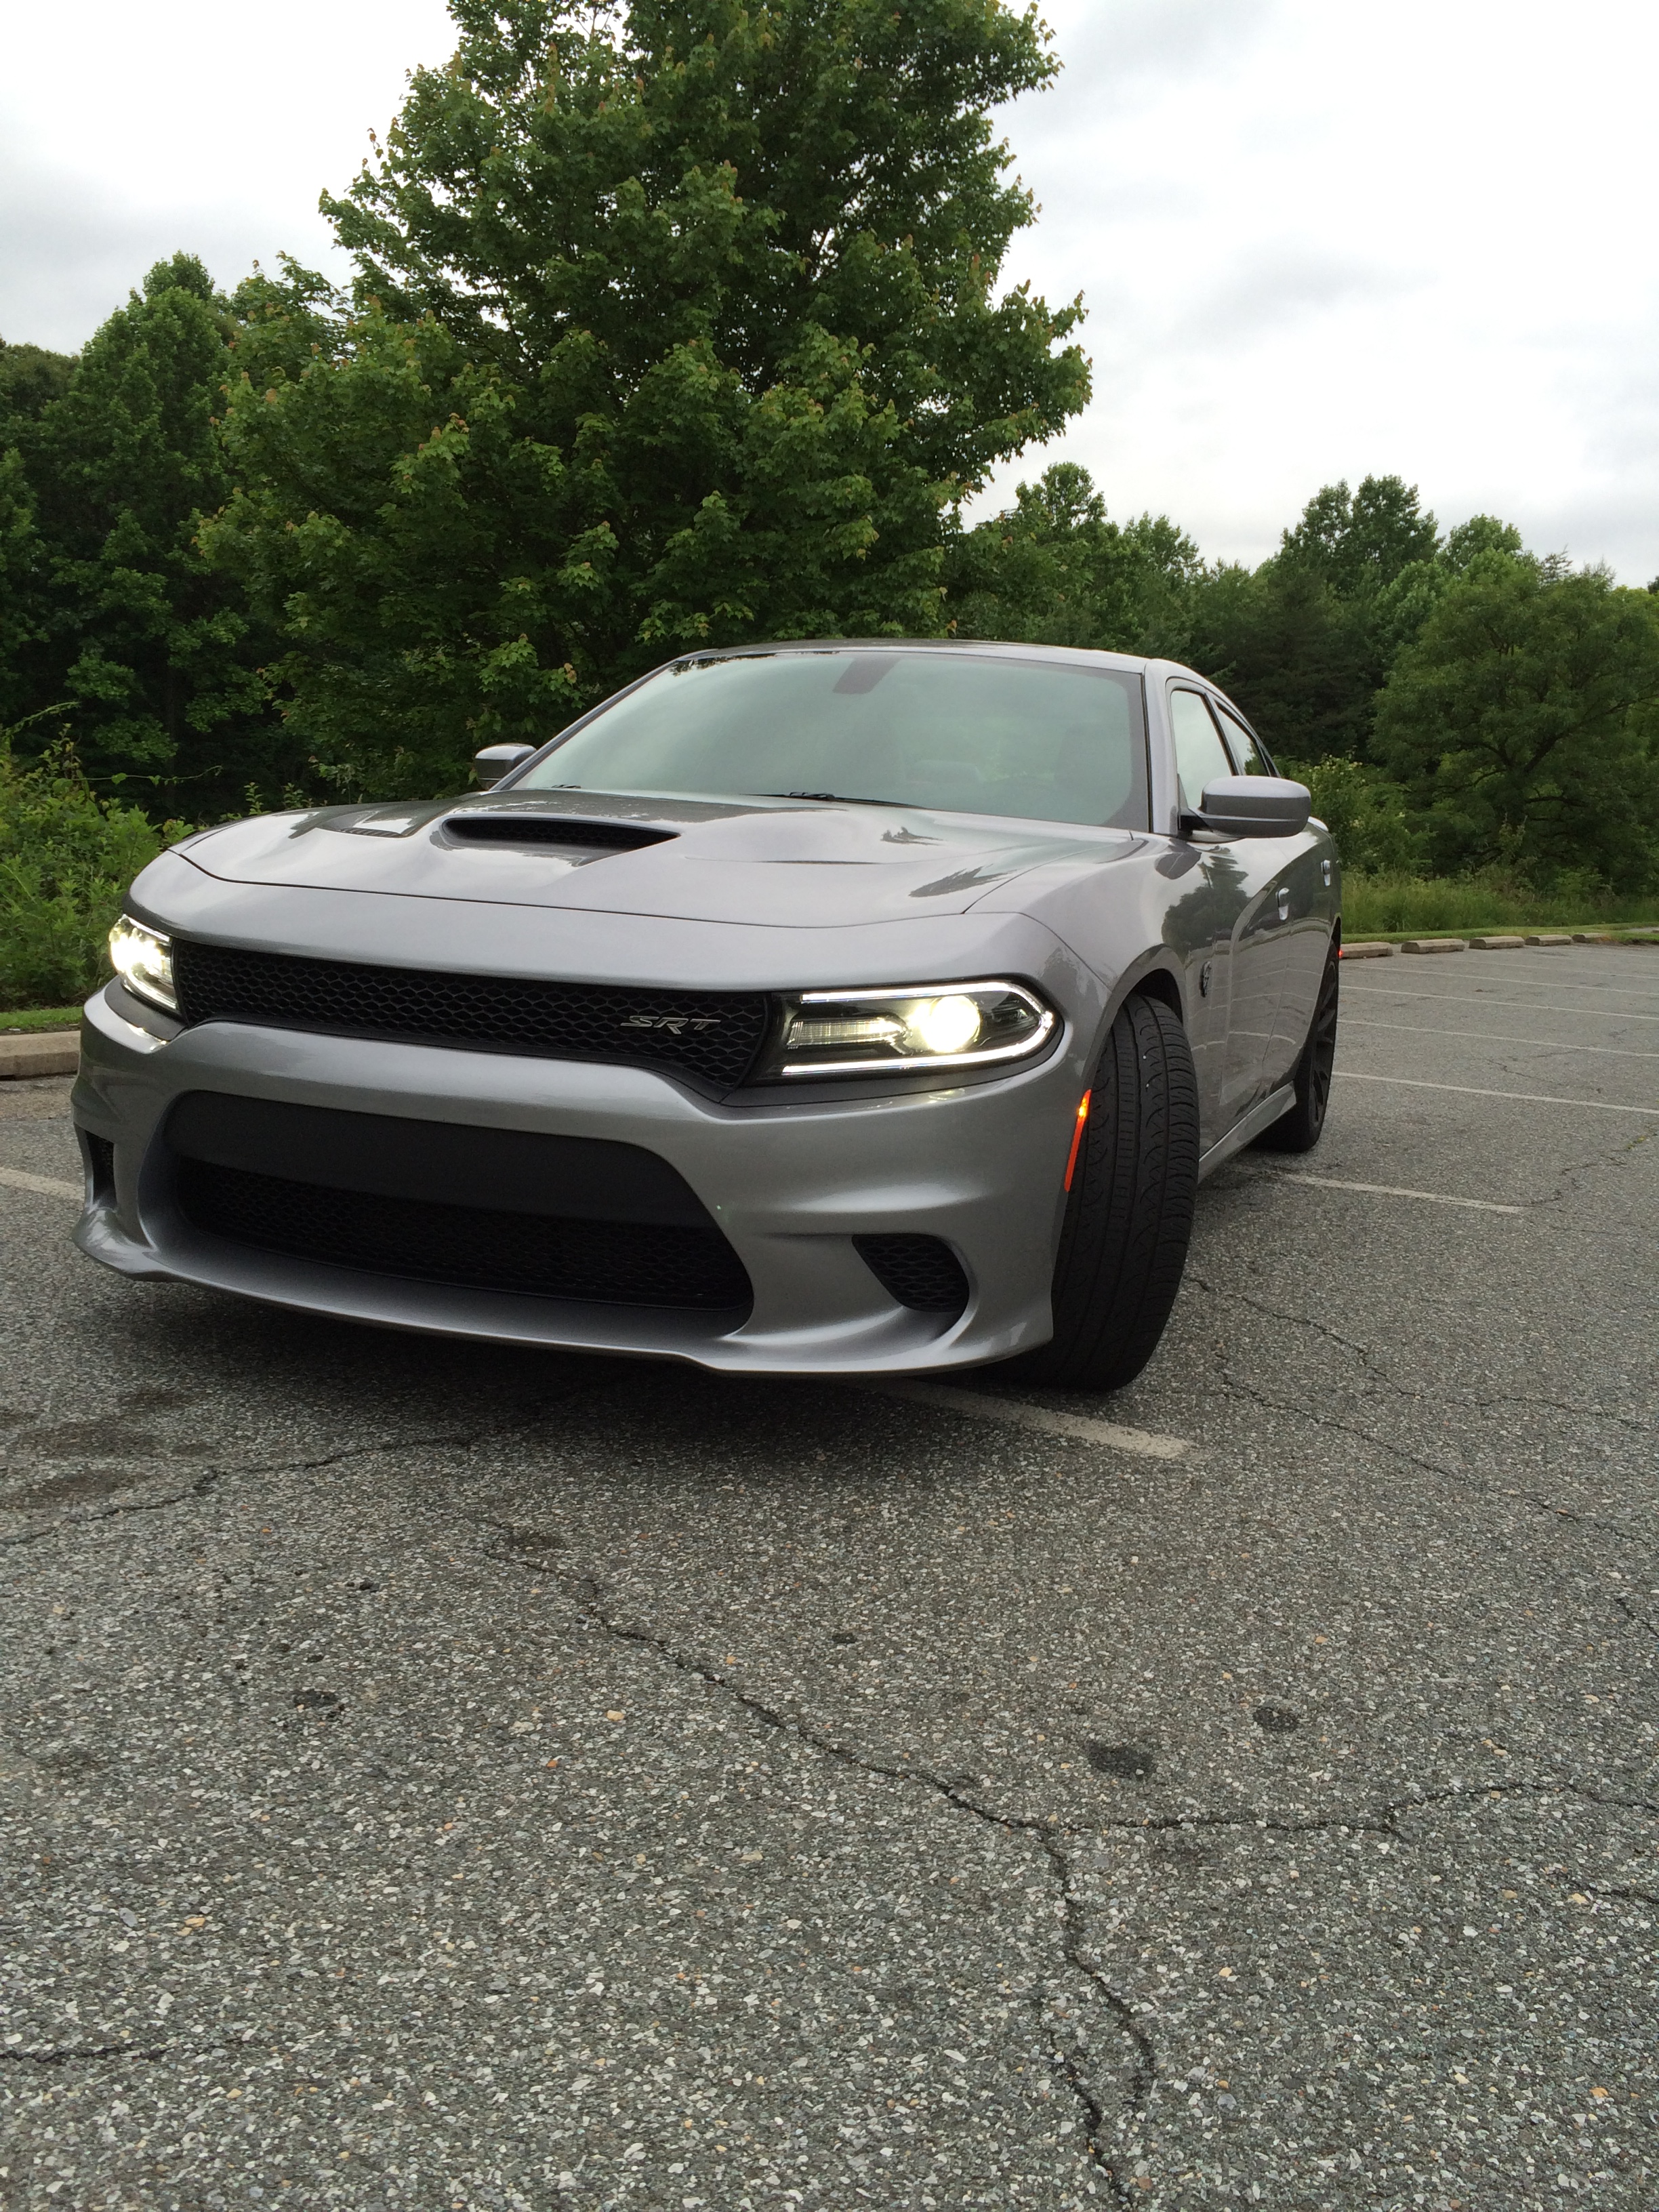 The Charger SRT Hellcat is fast, powerful